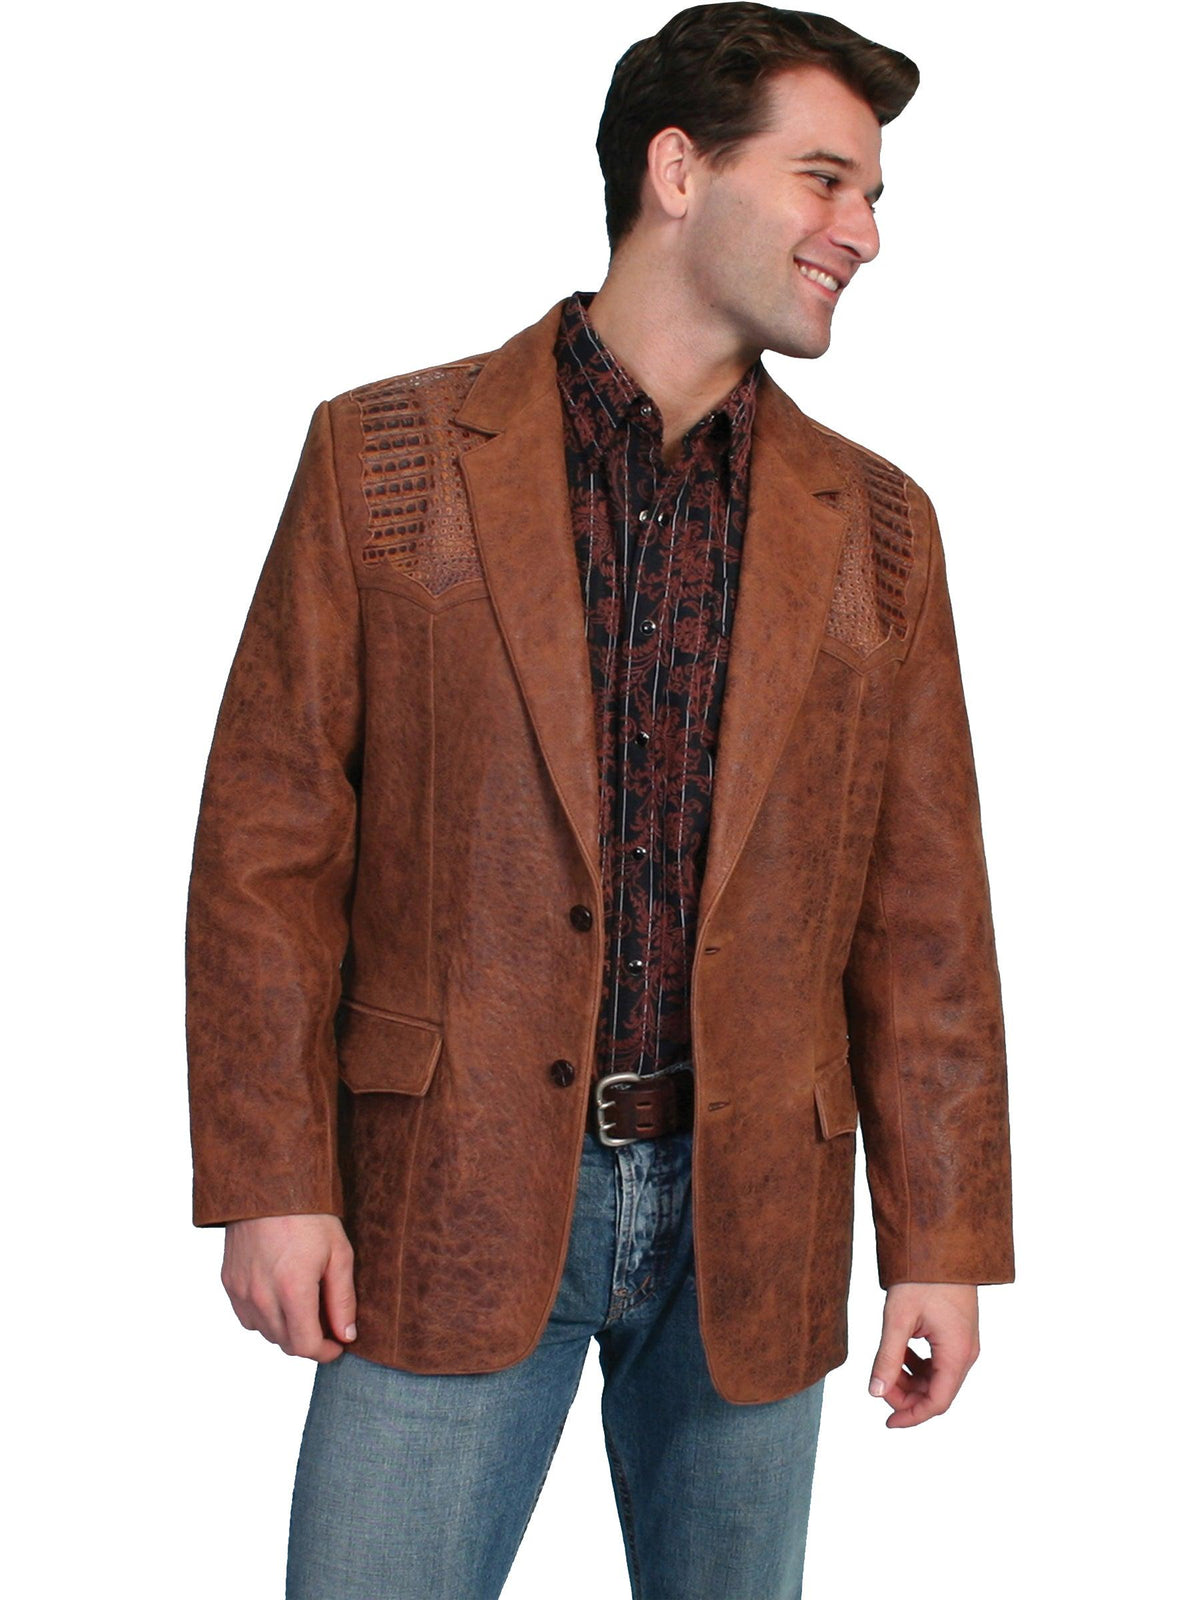 Scully BROWN CAIMAN INSET BLAZER - Flyclothing LLC